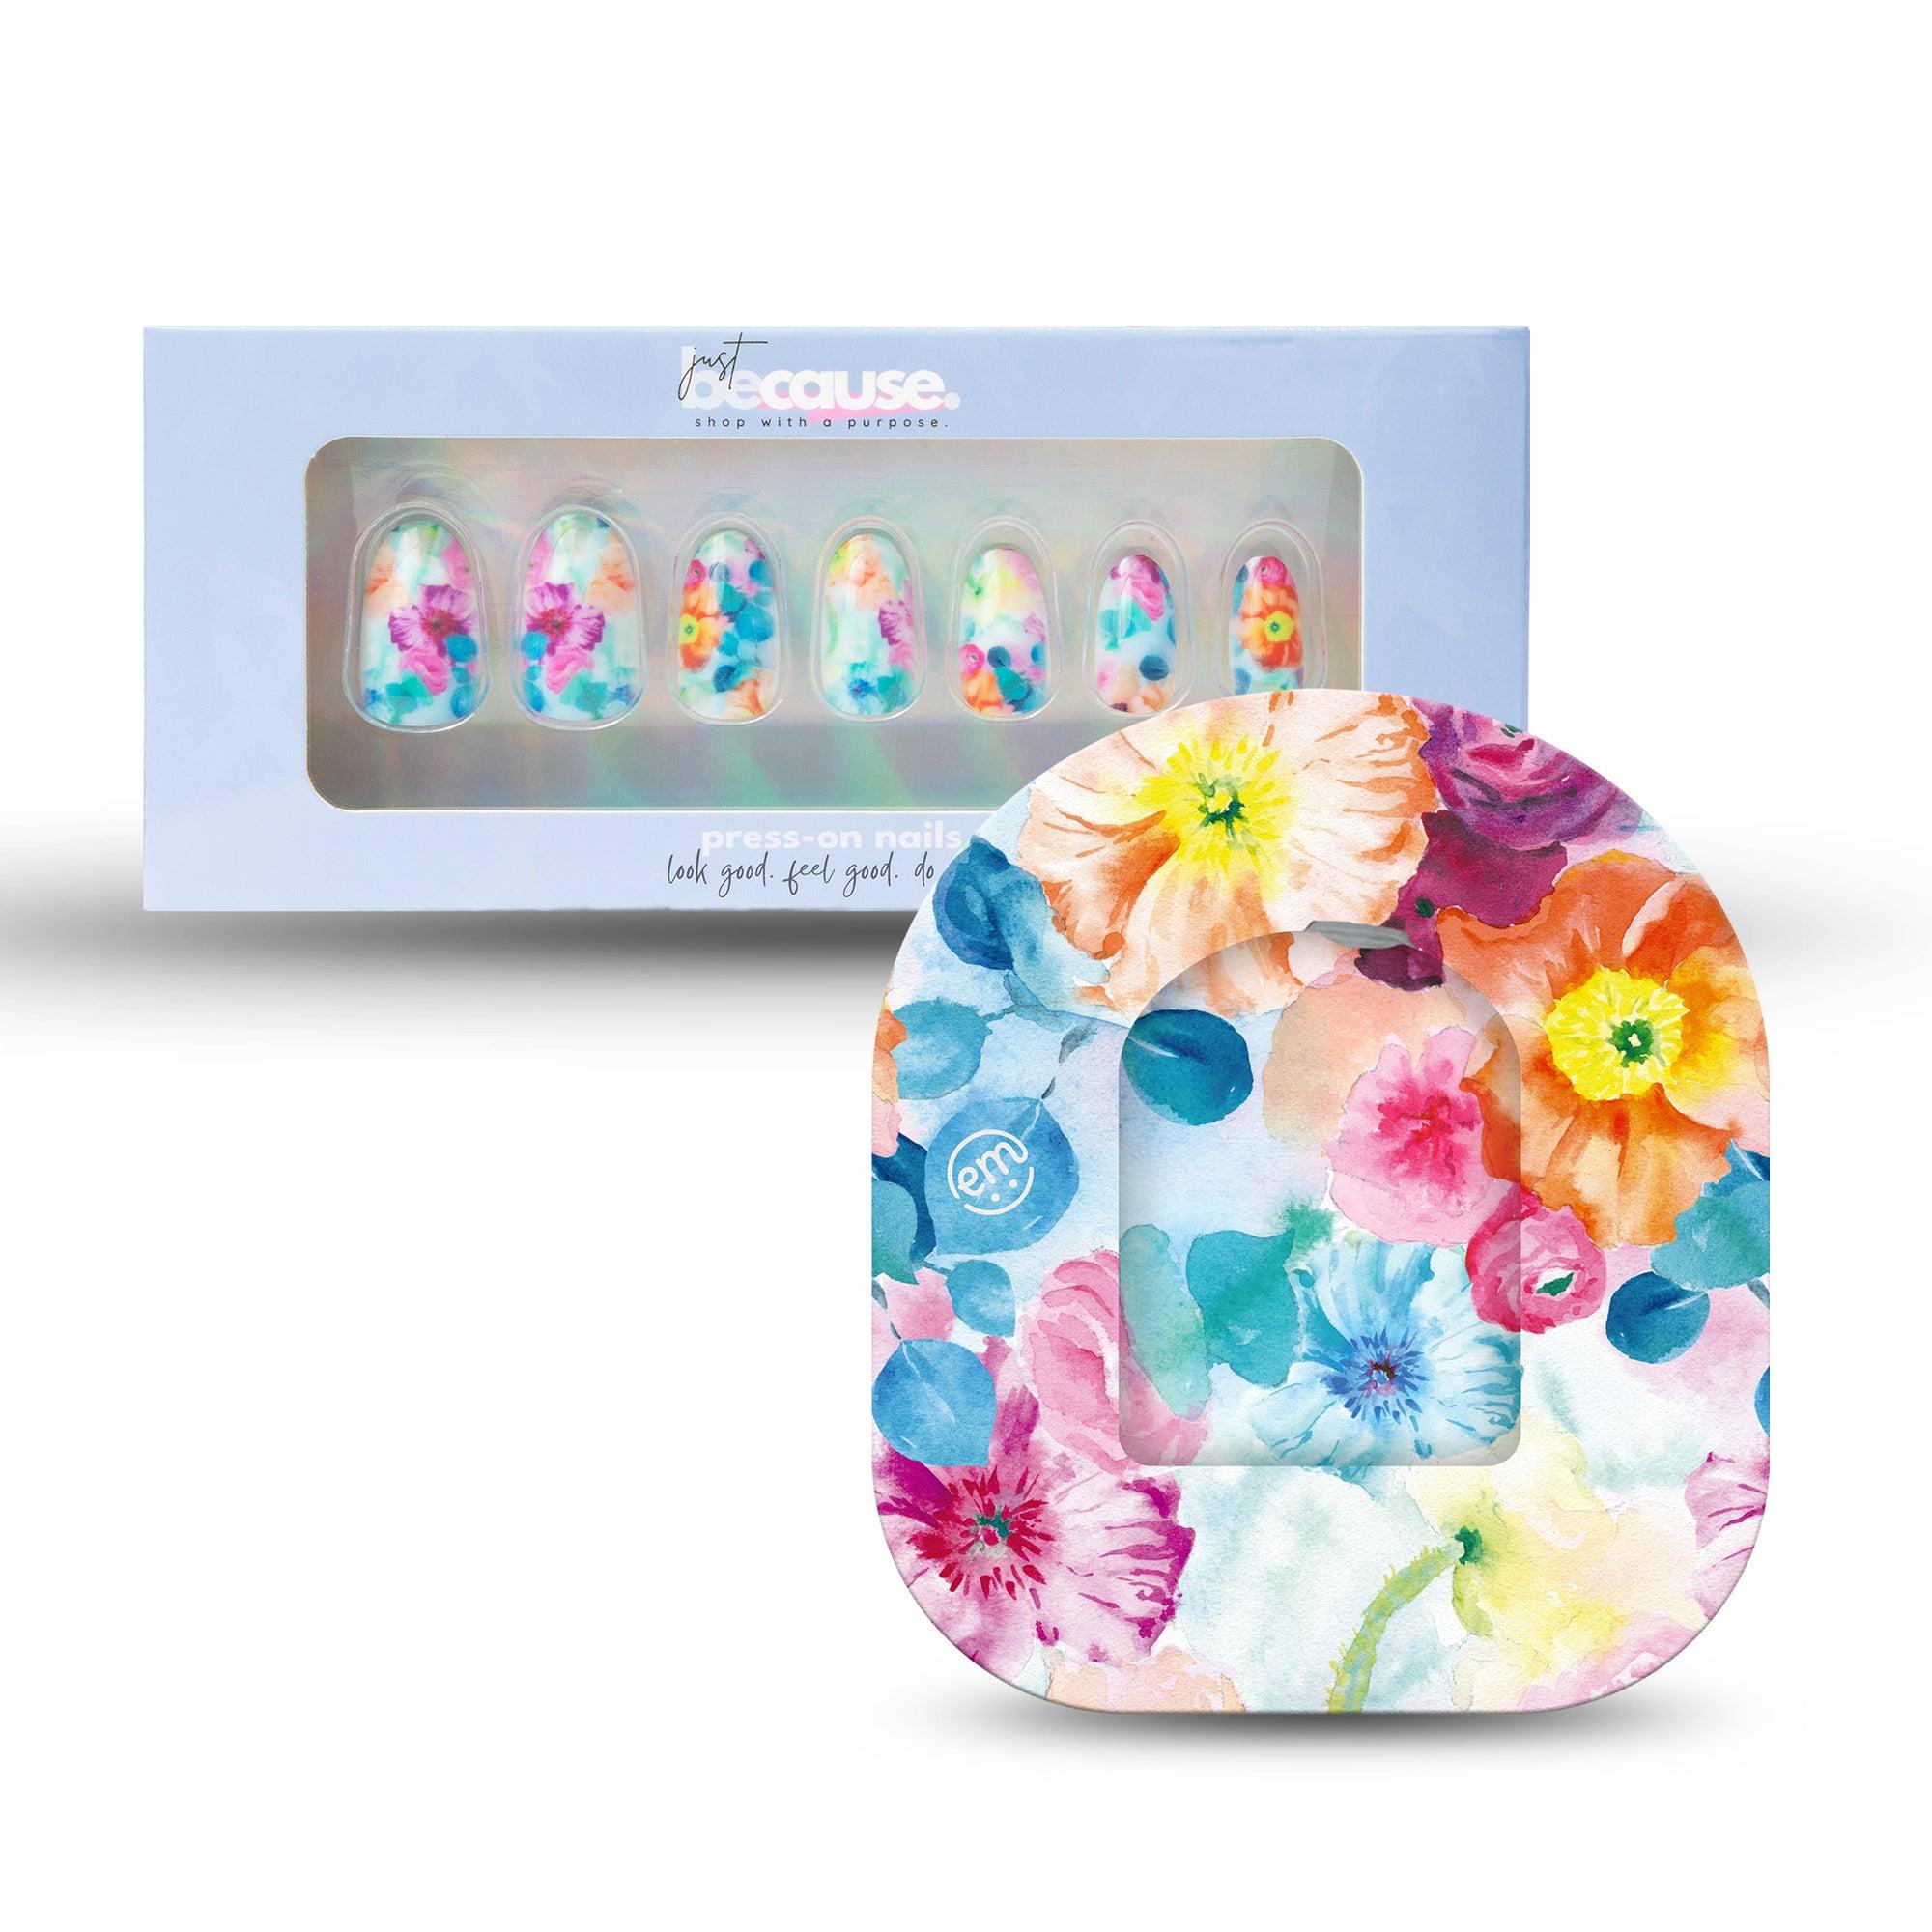 Just BeCause 24 Pcs ABS Press on nails Medium, watercolor floral art Fake Nails set with matching Watercolor Poppies Omnipod Overlay Adhesive Tape and Center Sticker, Support T1D - ExpressionMed.com	